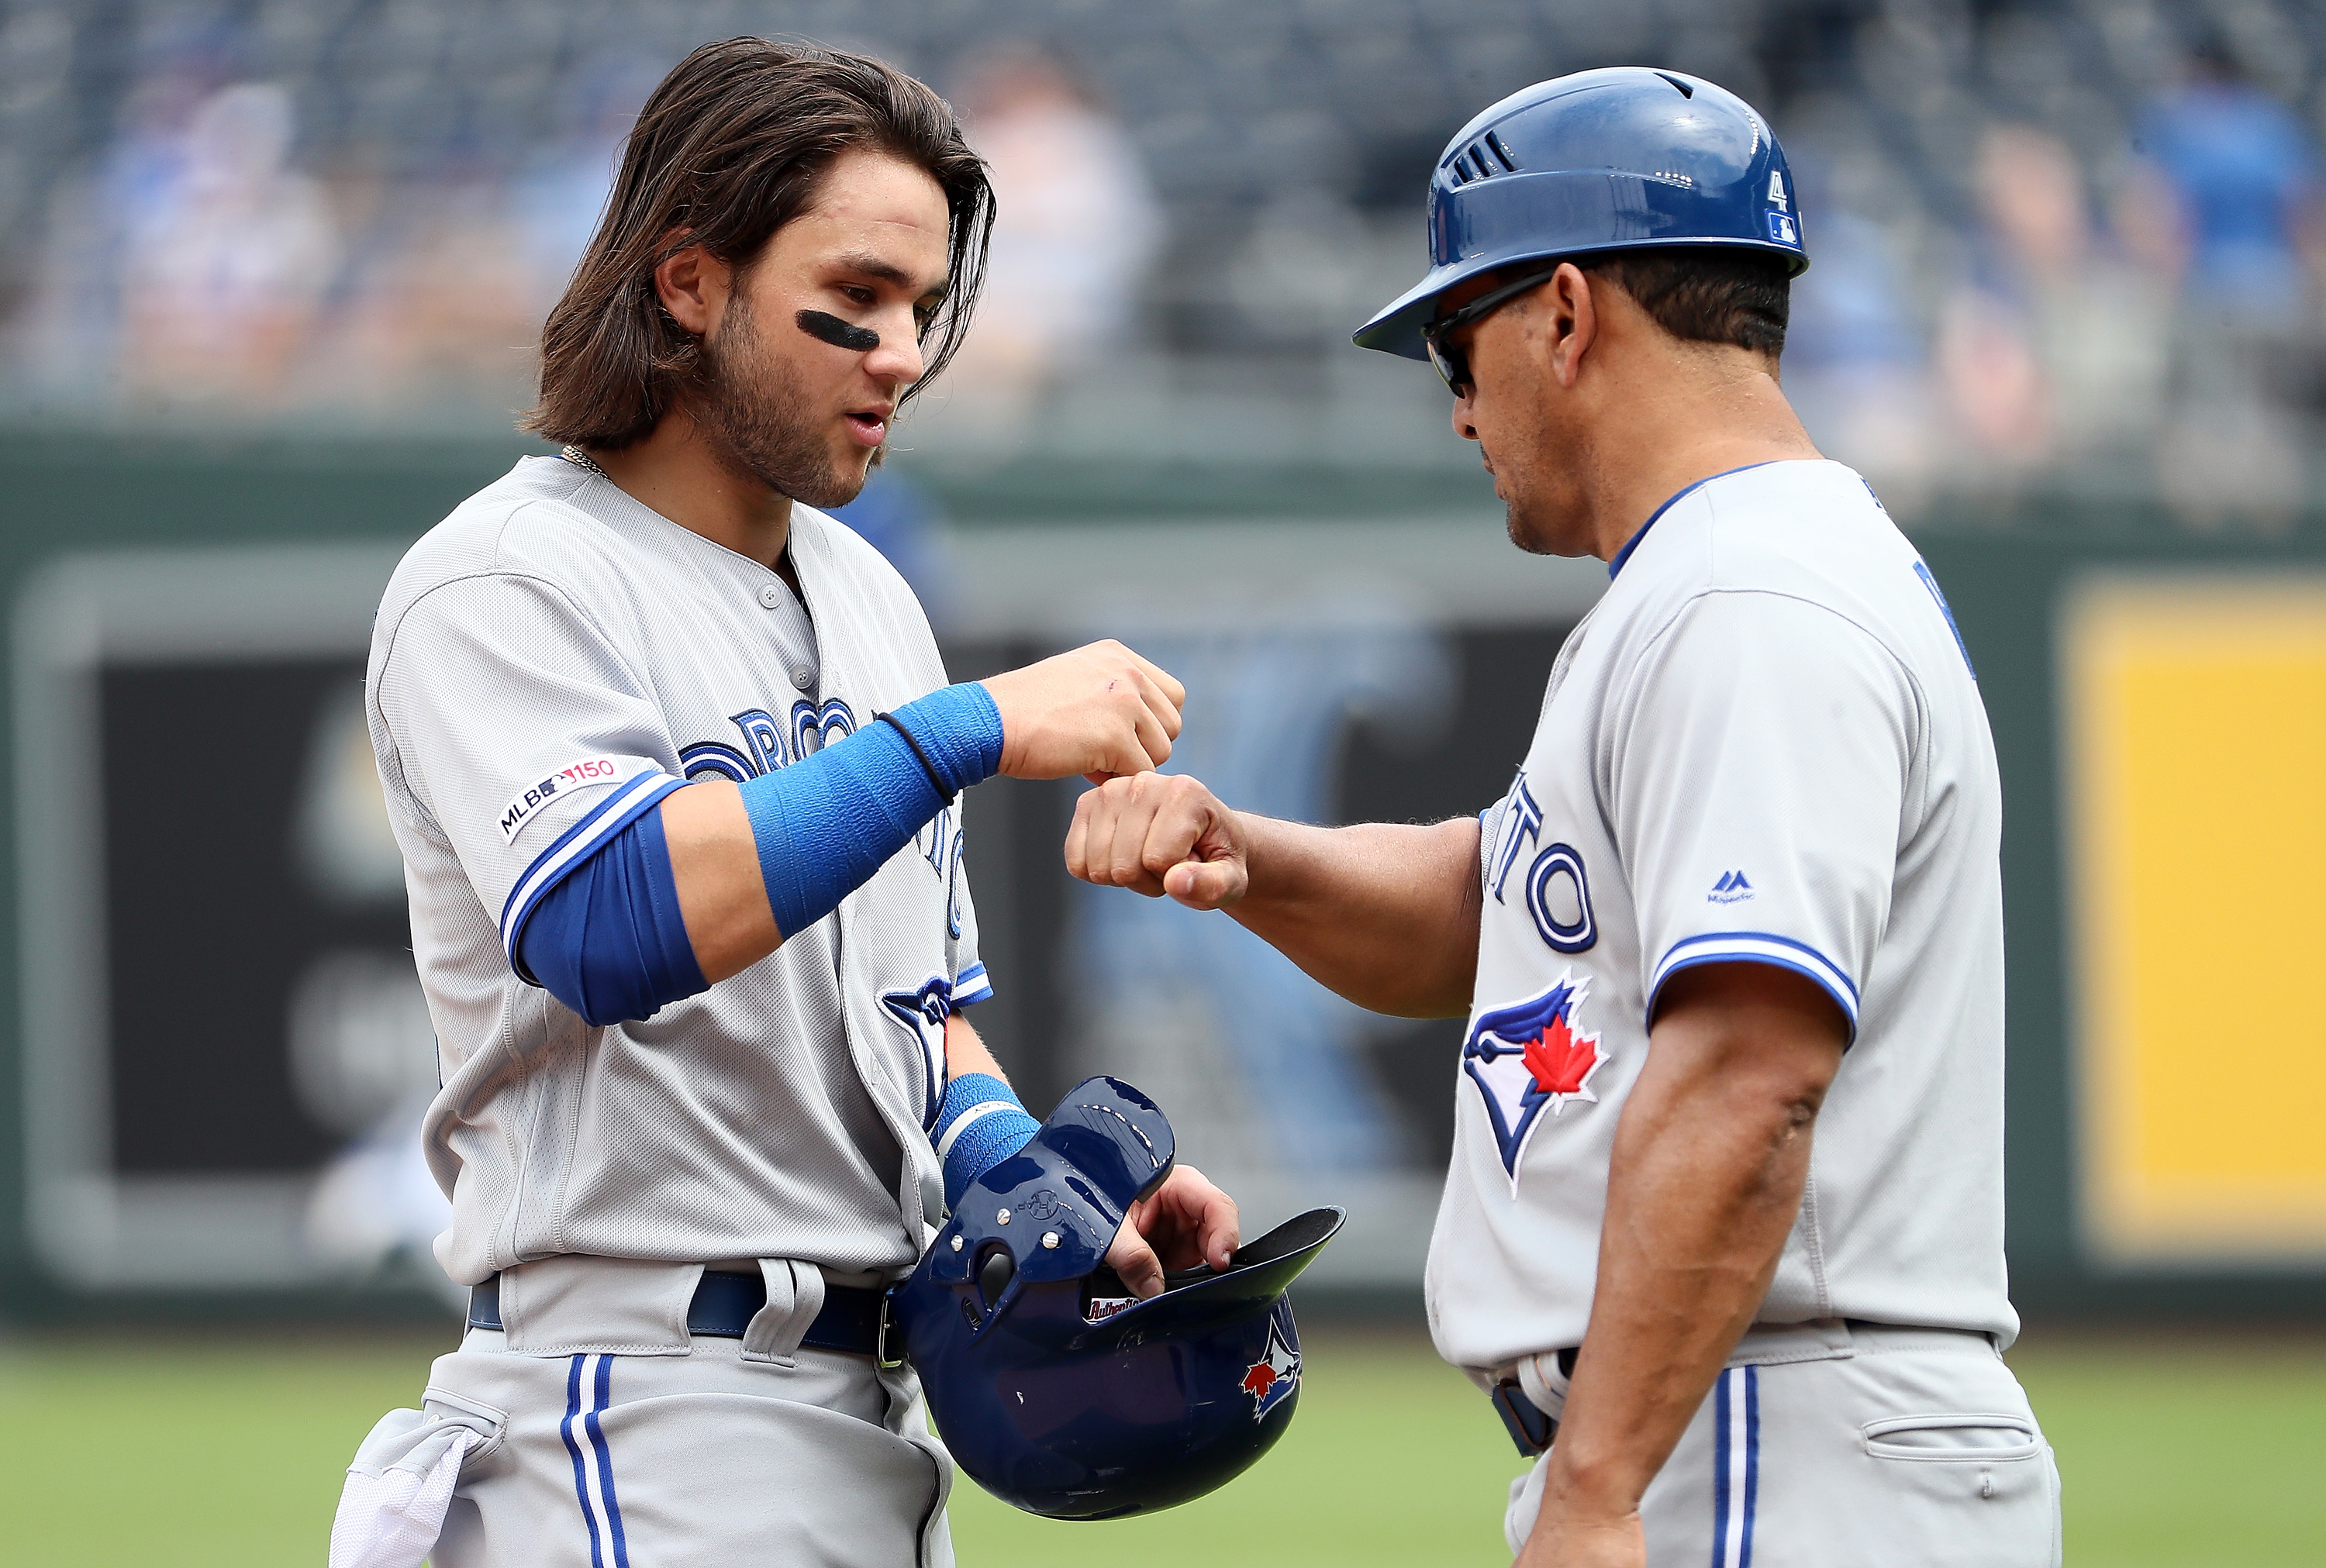 Jays prospect Bo Bichette ready for big stage after triple-A